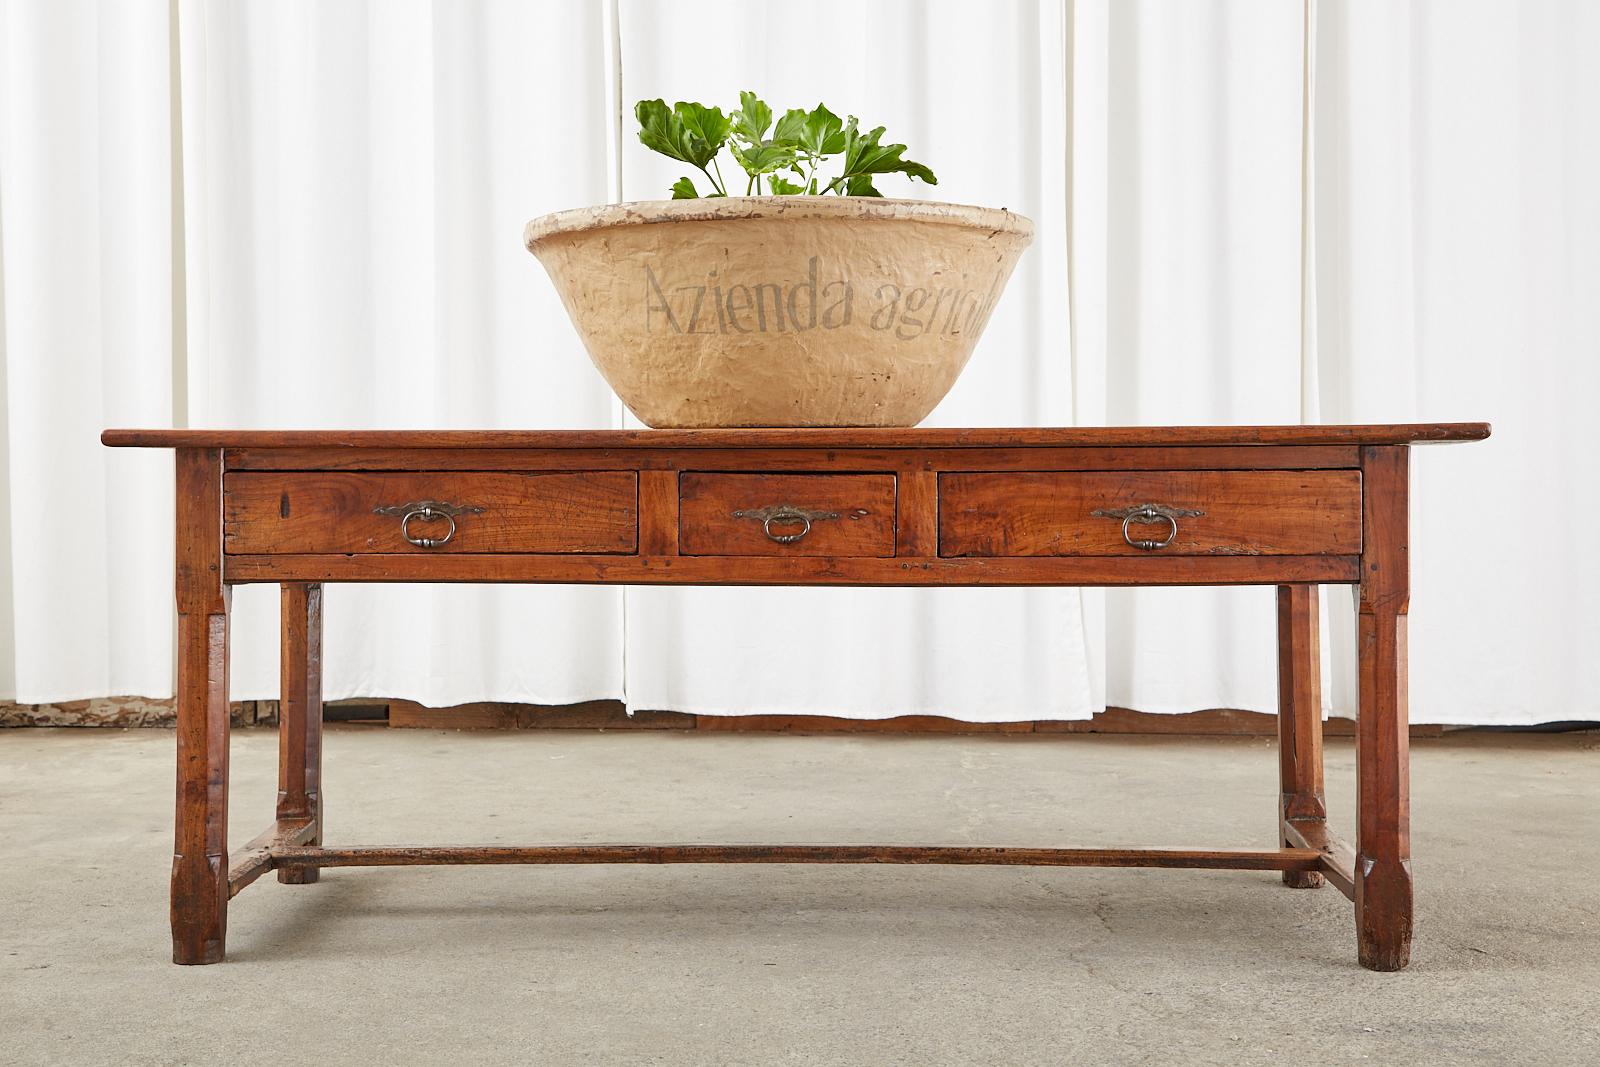 Rustic 19th century country French provincial farmhouse work table or console table. Constructed from fruitwood that appears to be cherry with wood peg joinery. The top is crafted from 1 inch thick planks. The frieze has three large storage drawers